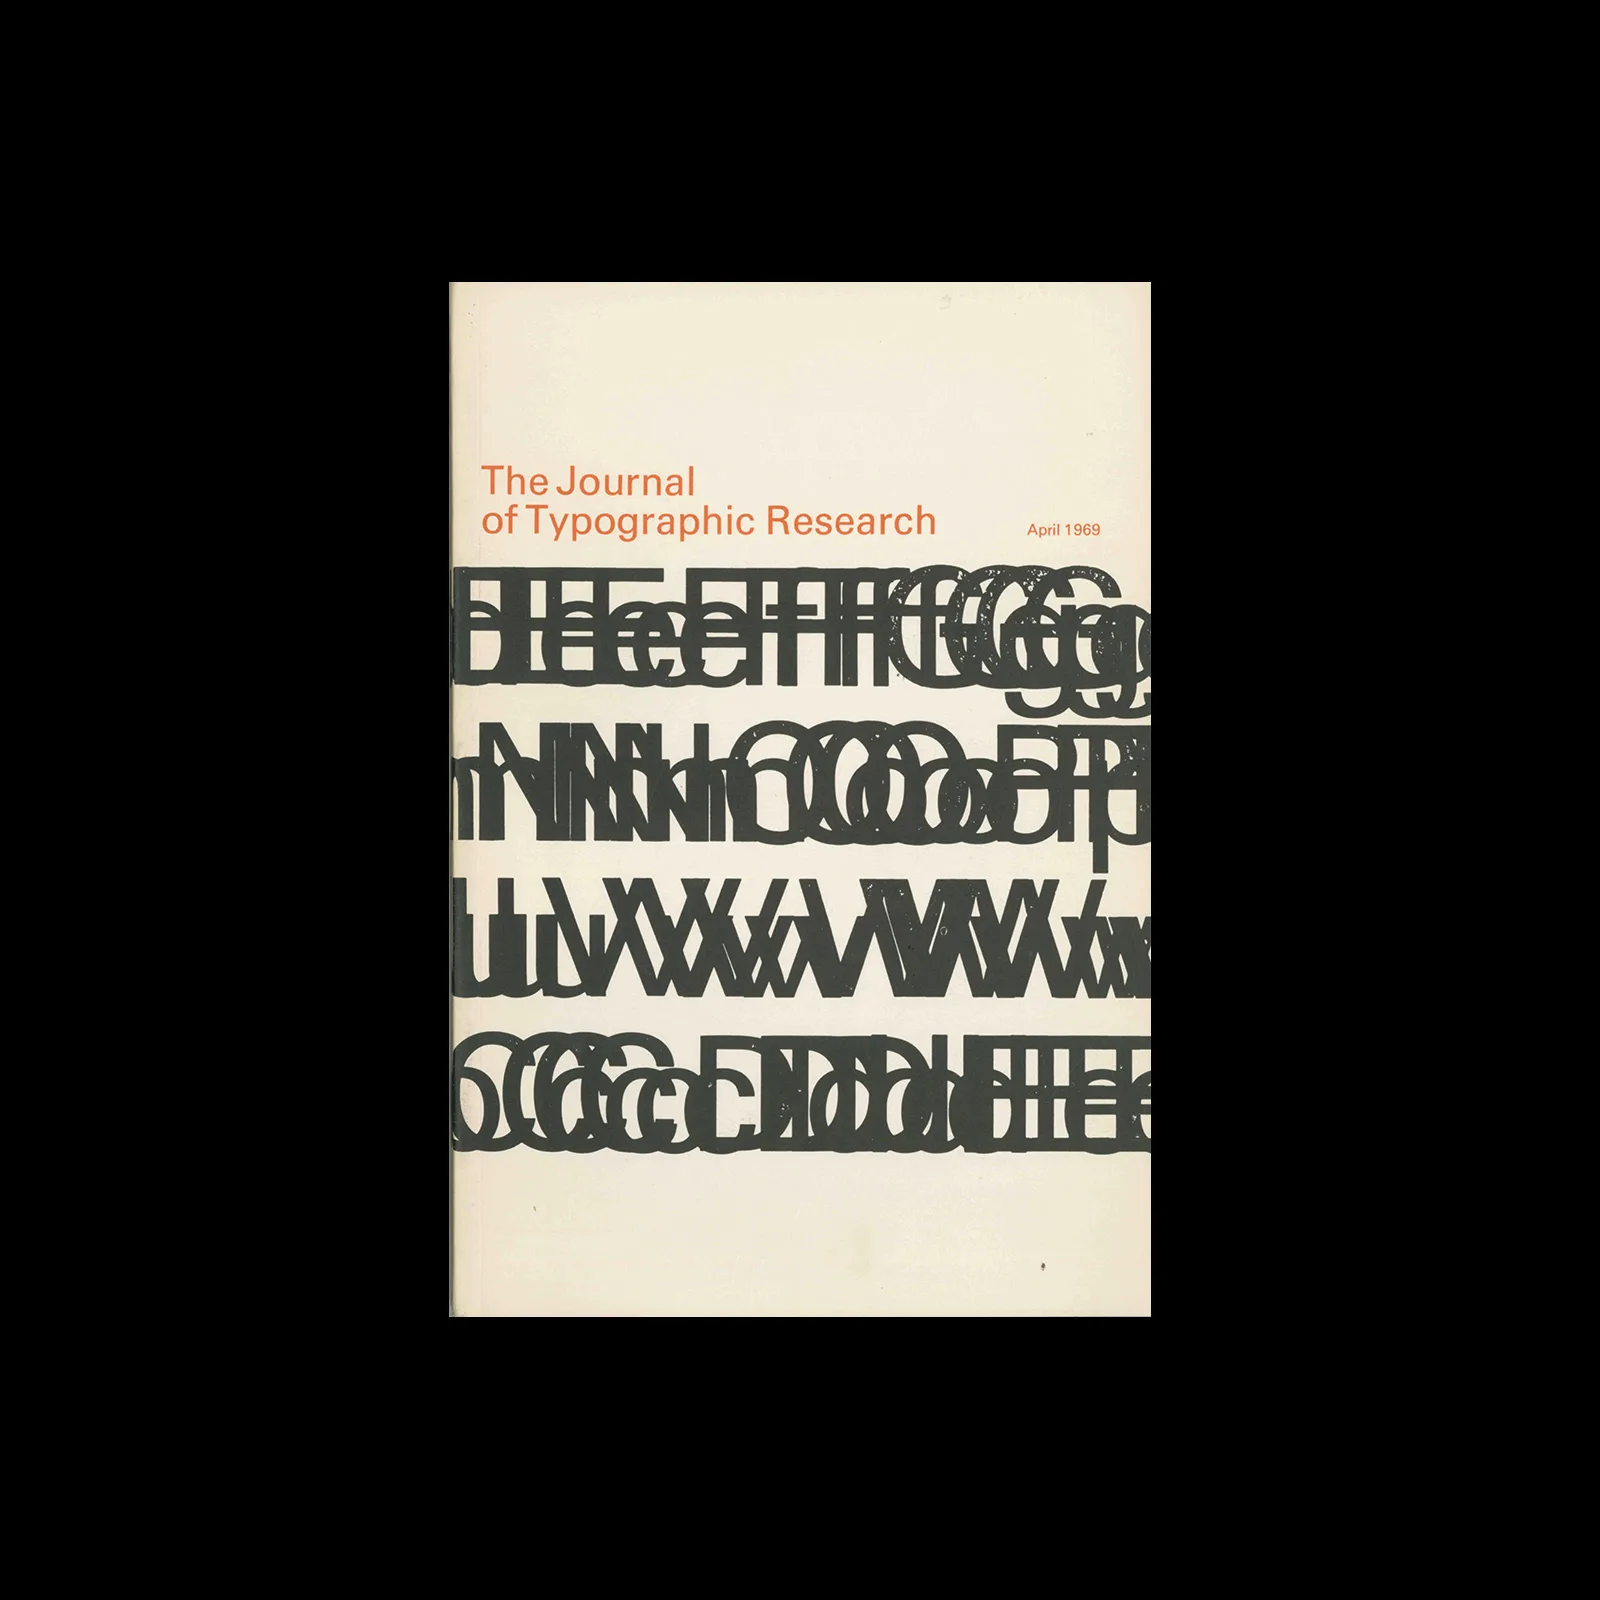 Visible Language (The Journal of Typographic Research, Vol 03, 02, April 1969